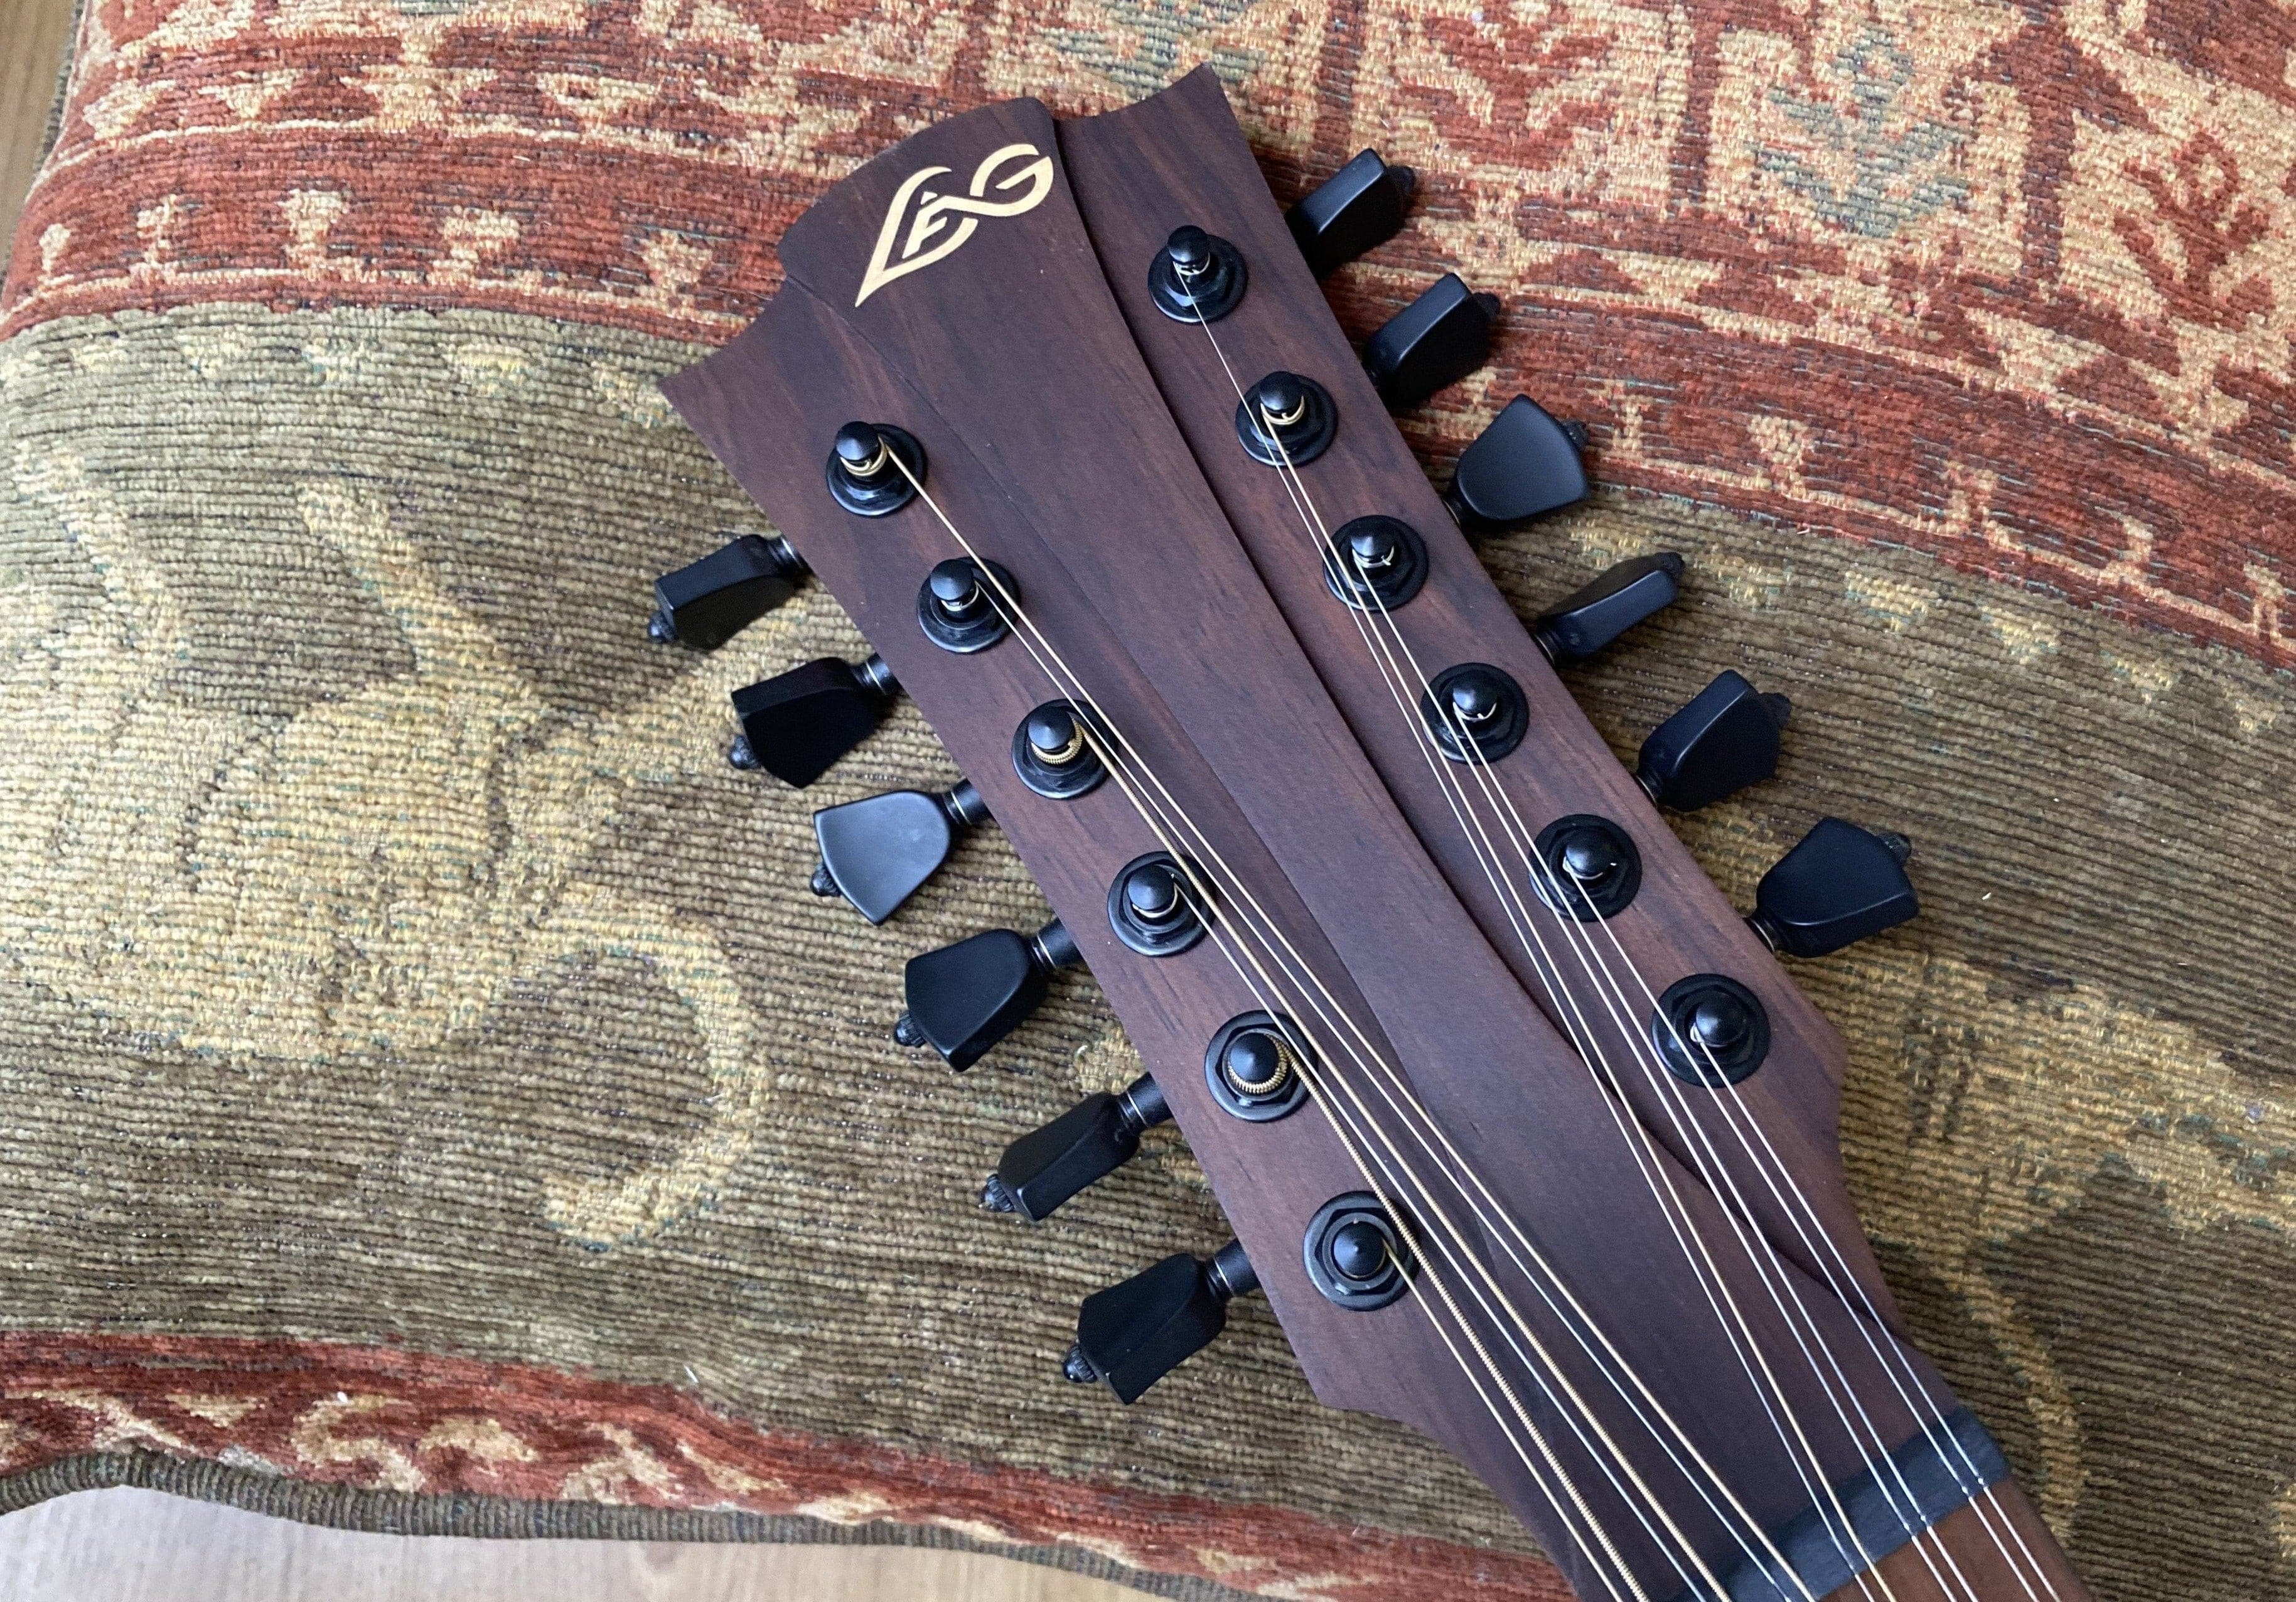 LAG T177 J12CE  Jumbo Cutaway Electro Acoustic 12 String Guitar - Gorgeous!, Electro Acoustic Guitar for sale at Richards Guitars.